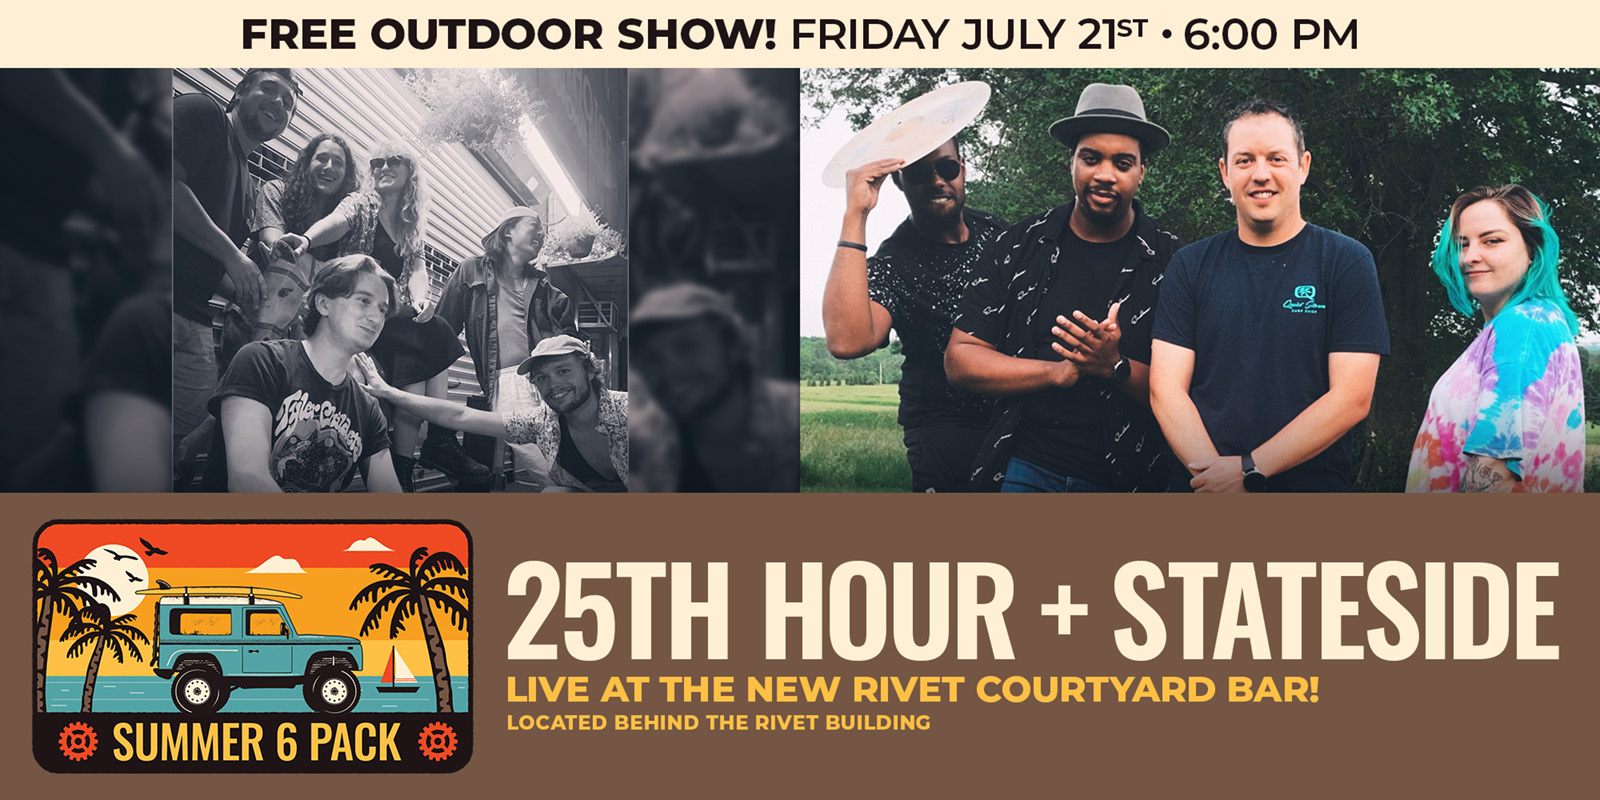 The Summer 6 Pack Free Outdoor Series continues at Rivet: Canteen & Assembly with 25th Hour and Stateside on Friday, July 21st, 2023. Be there!